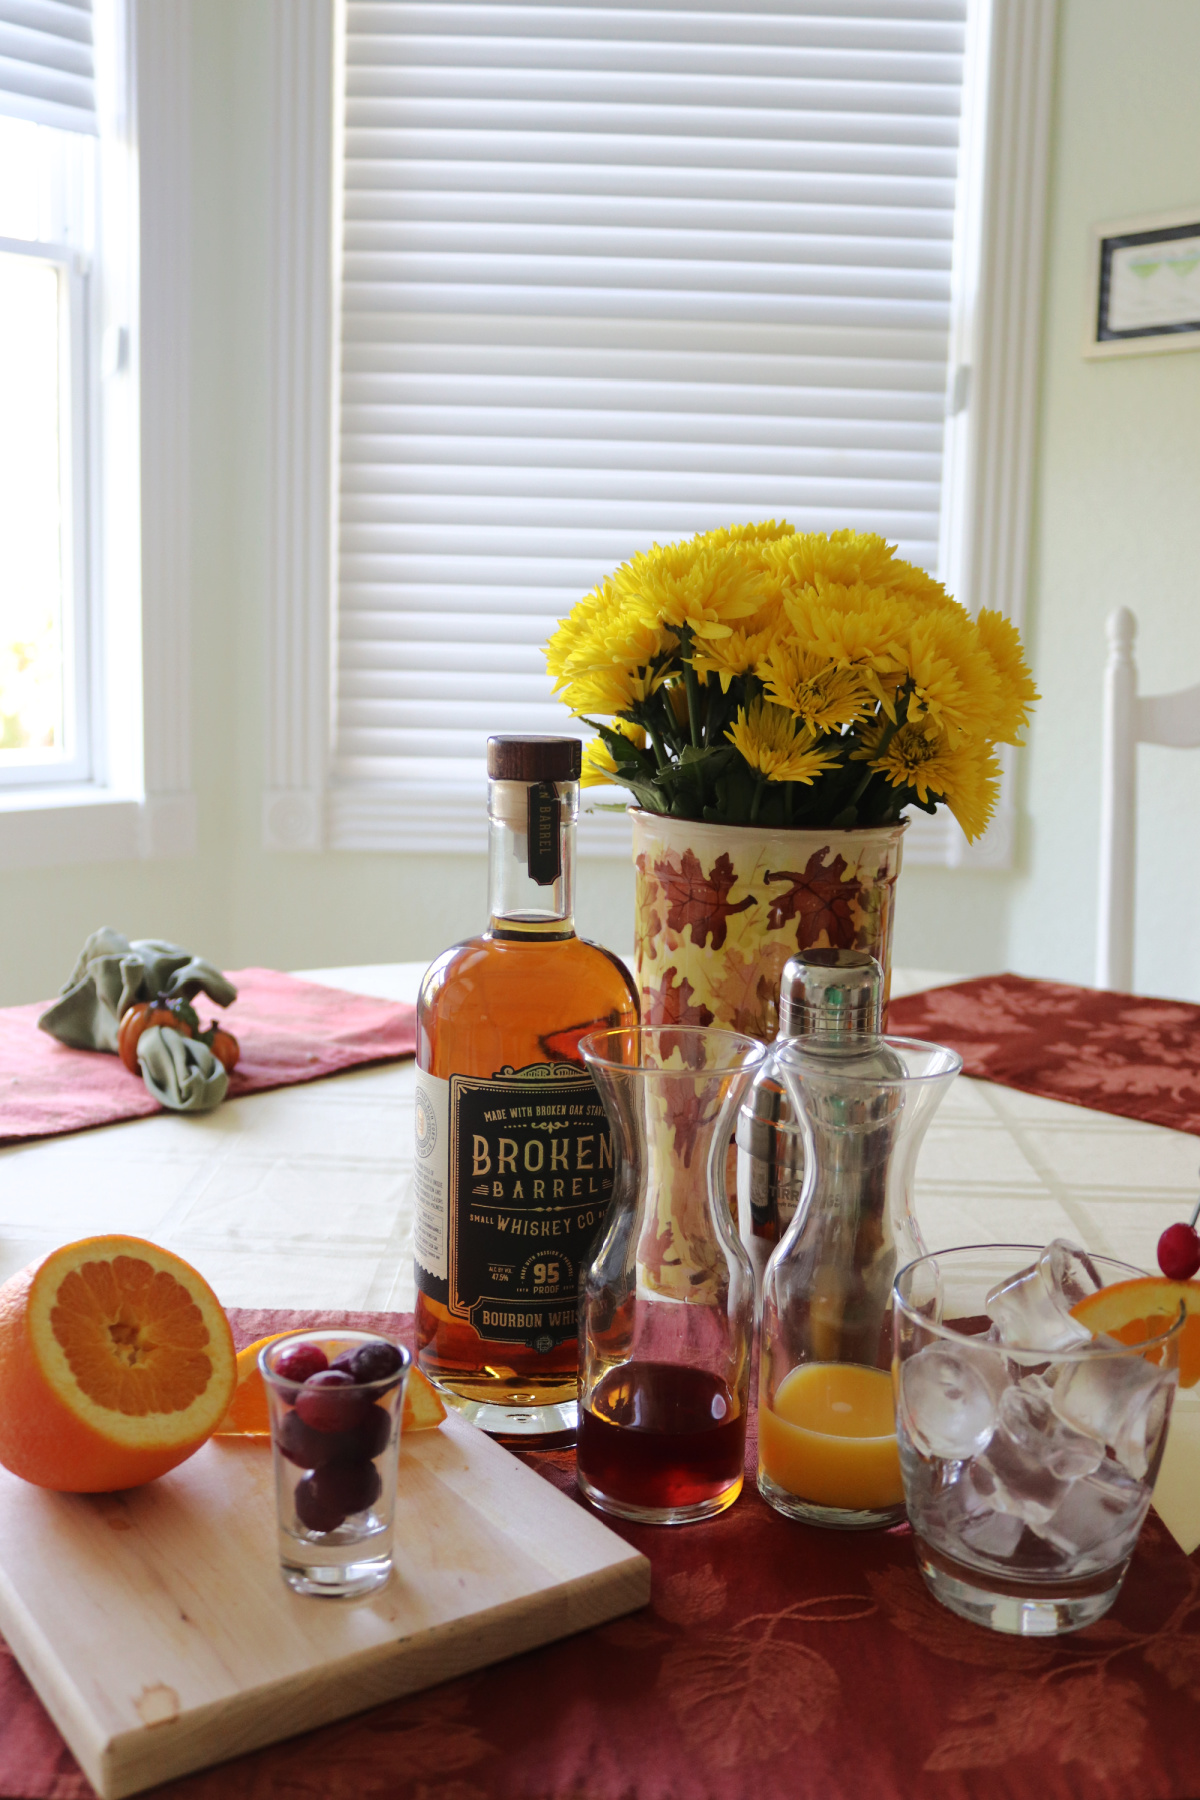 A bottle of bourbon, carafes with orange and cranberry juice, a glass with ice and half of an orange on a cutting board all on a table.